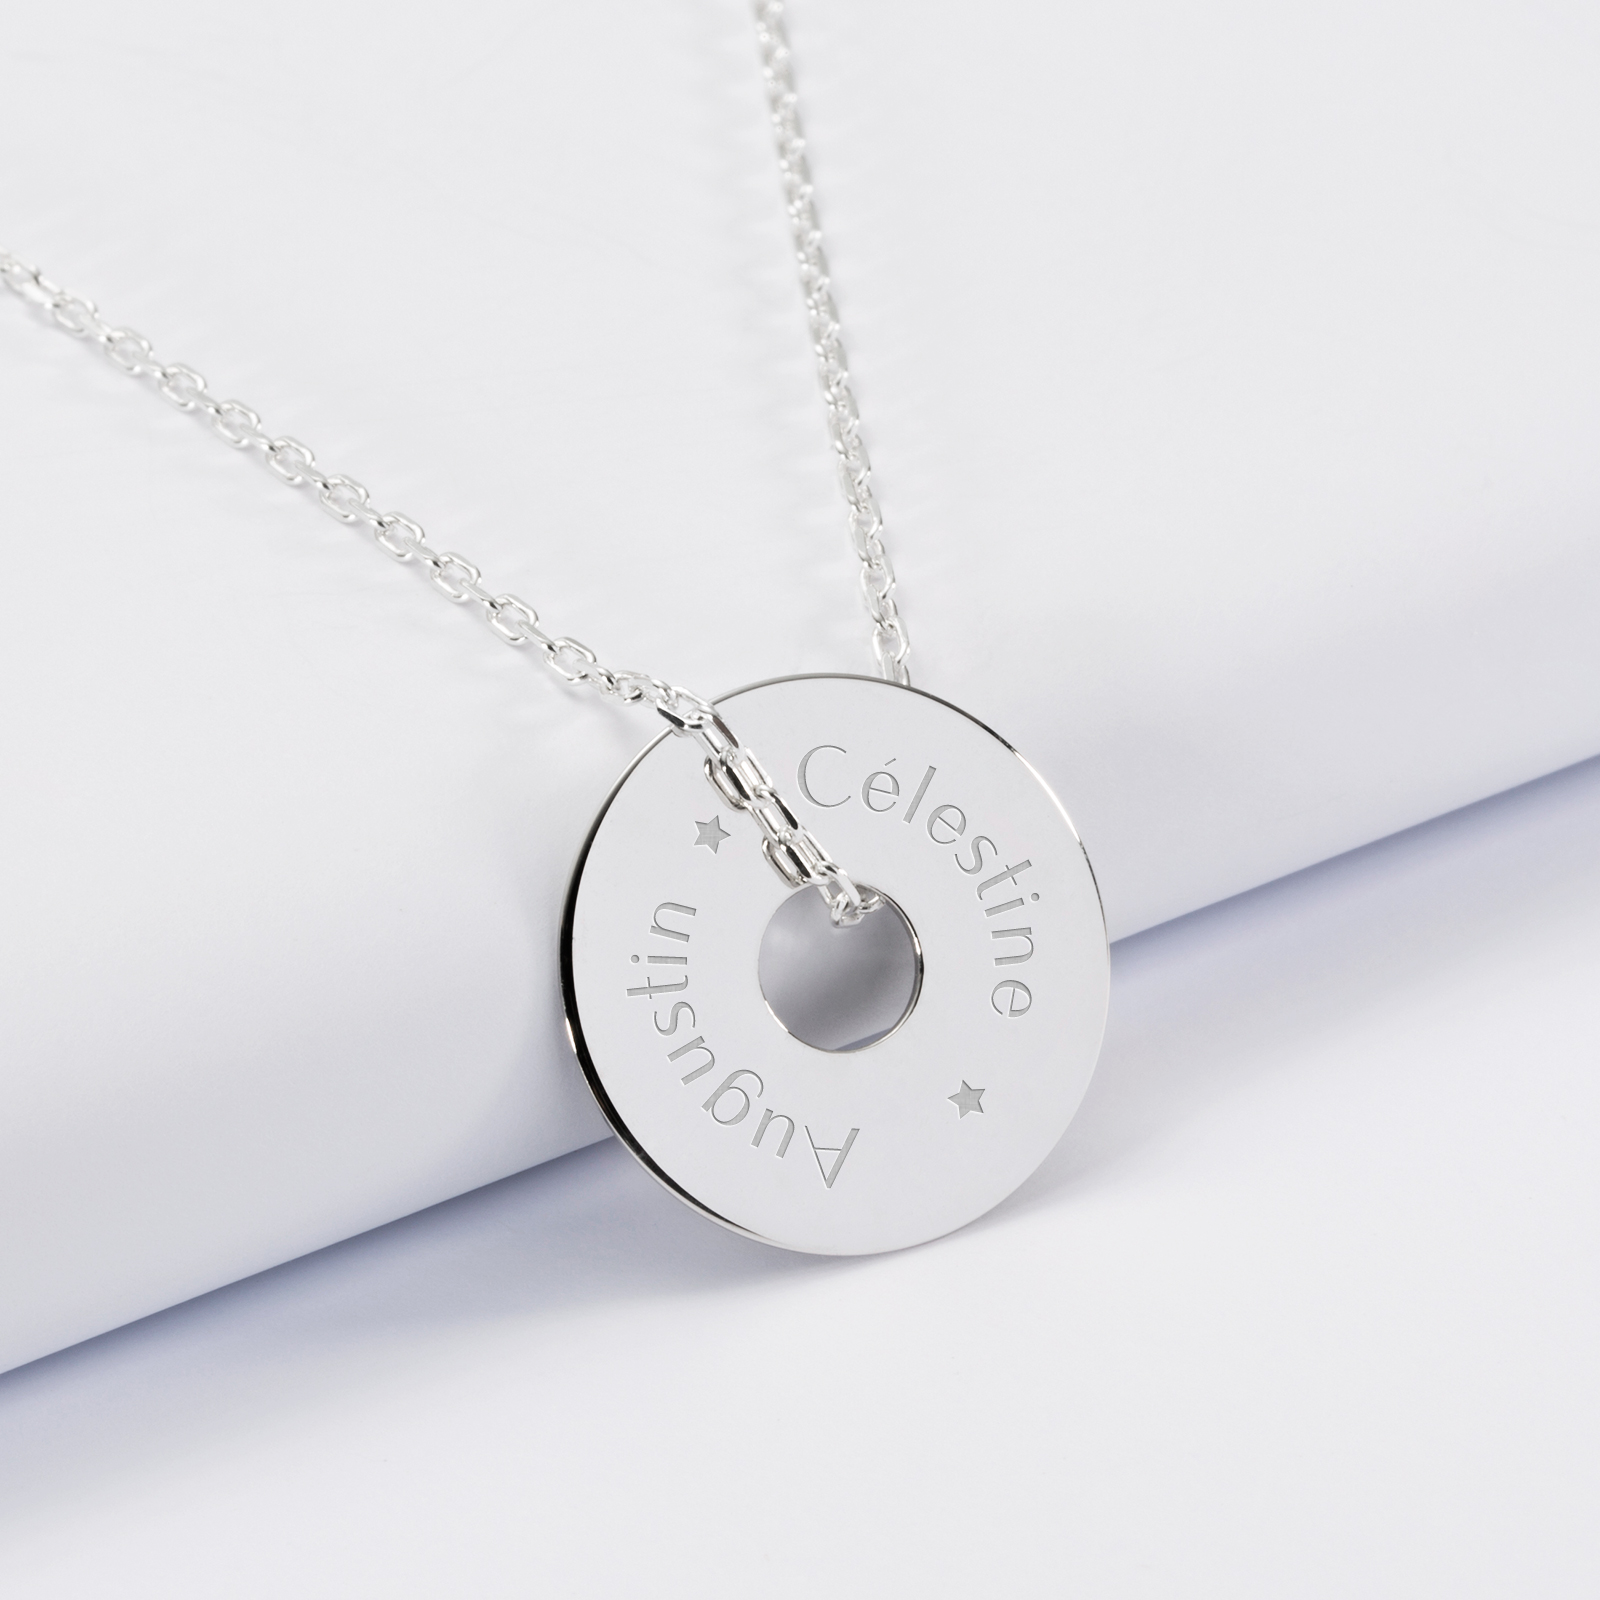 Personalised pendant engraved silver open disc 20mm